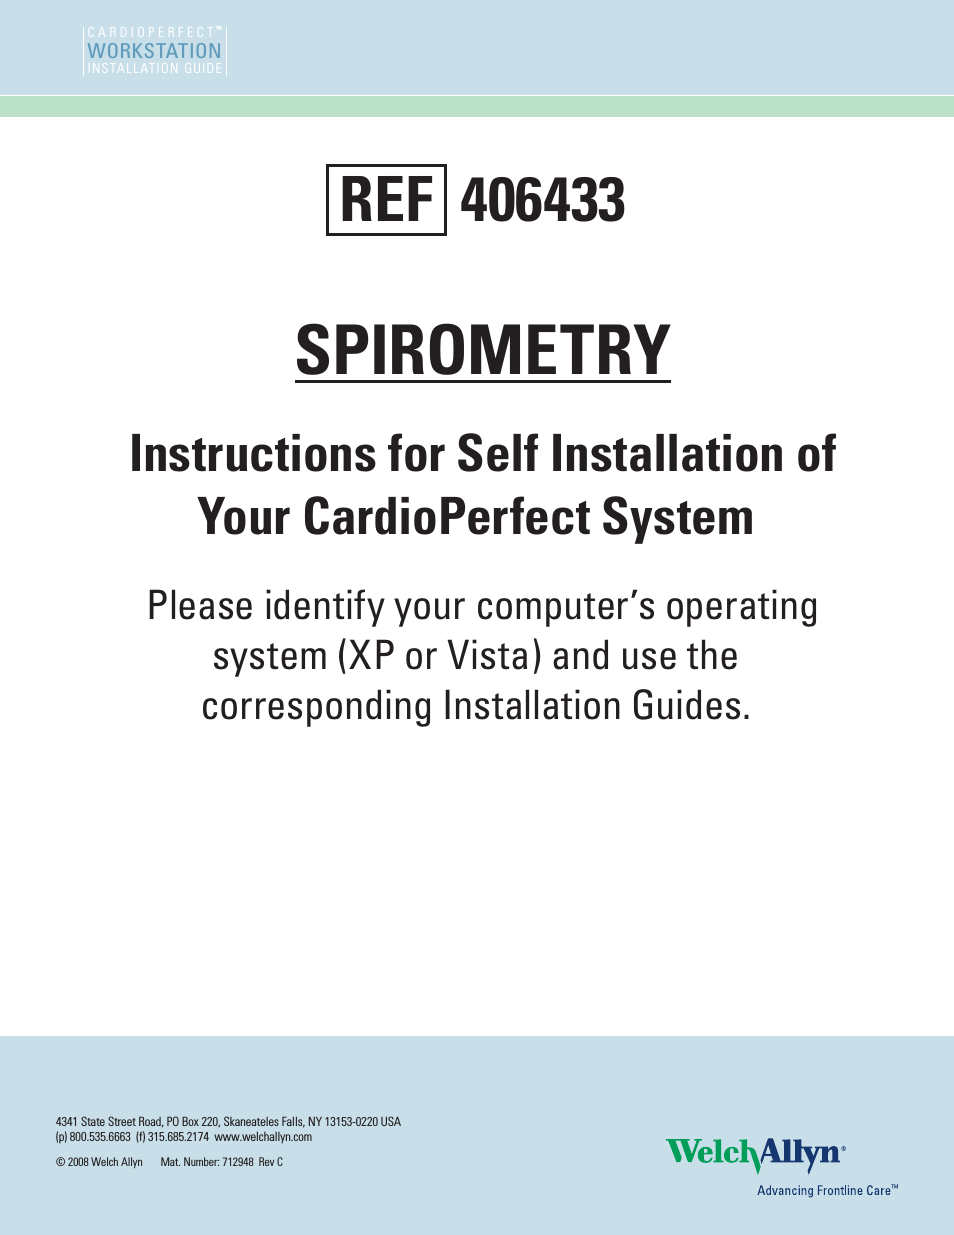 Cardio Perfect Workstation (SW 1.6.2) Spirometry - Installation Guide